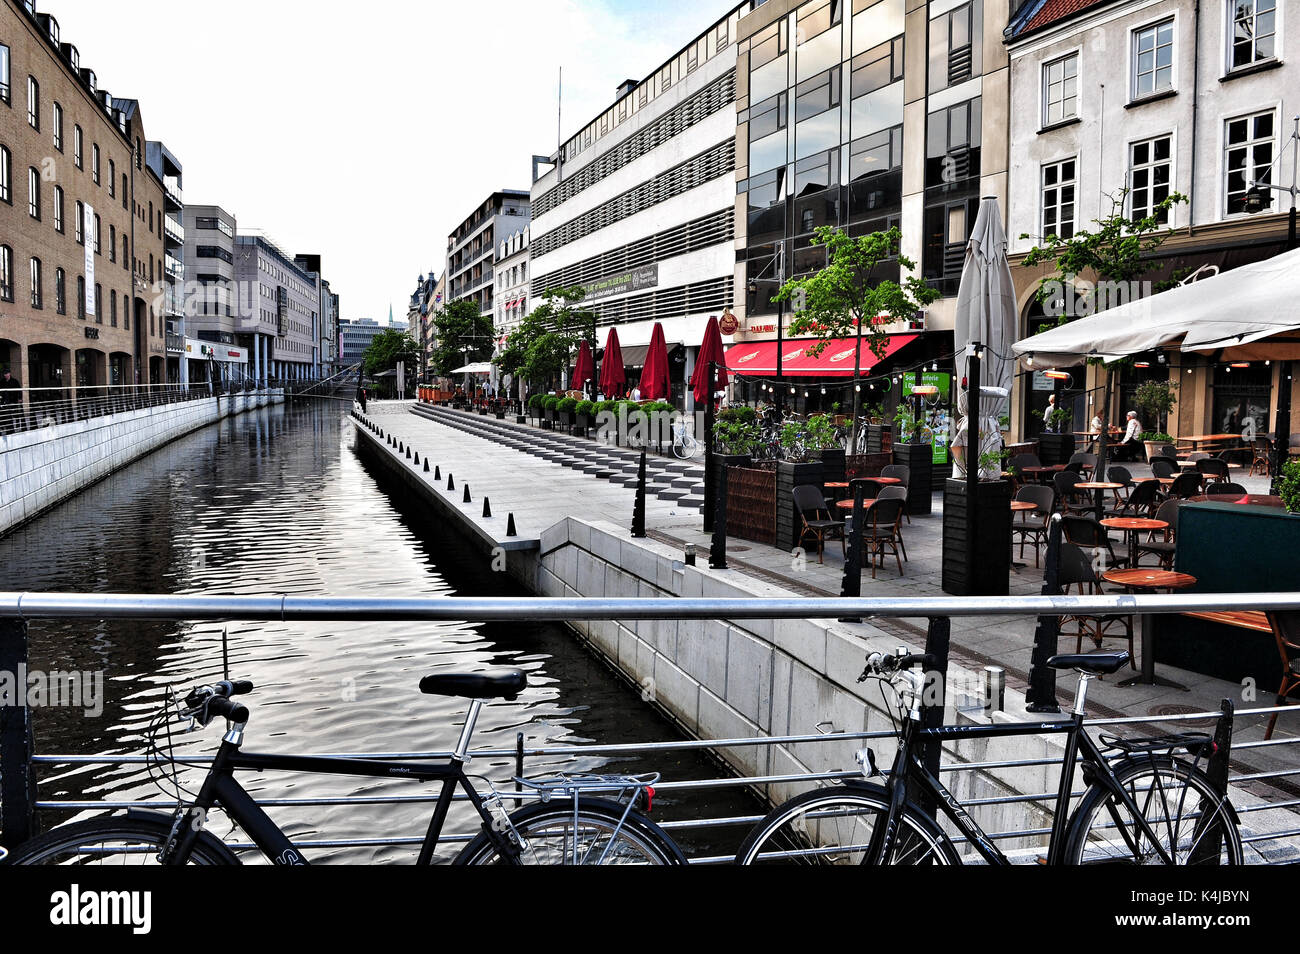 The pedestrianized canal zone in Aarhus (Aboulevarden). In the 1930s, Aarhus covered over its river to make a new road, but in the 1980s, locals decid Stock Photo